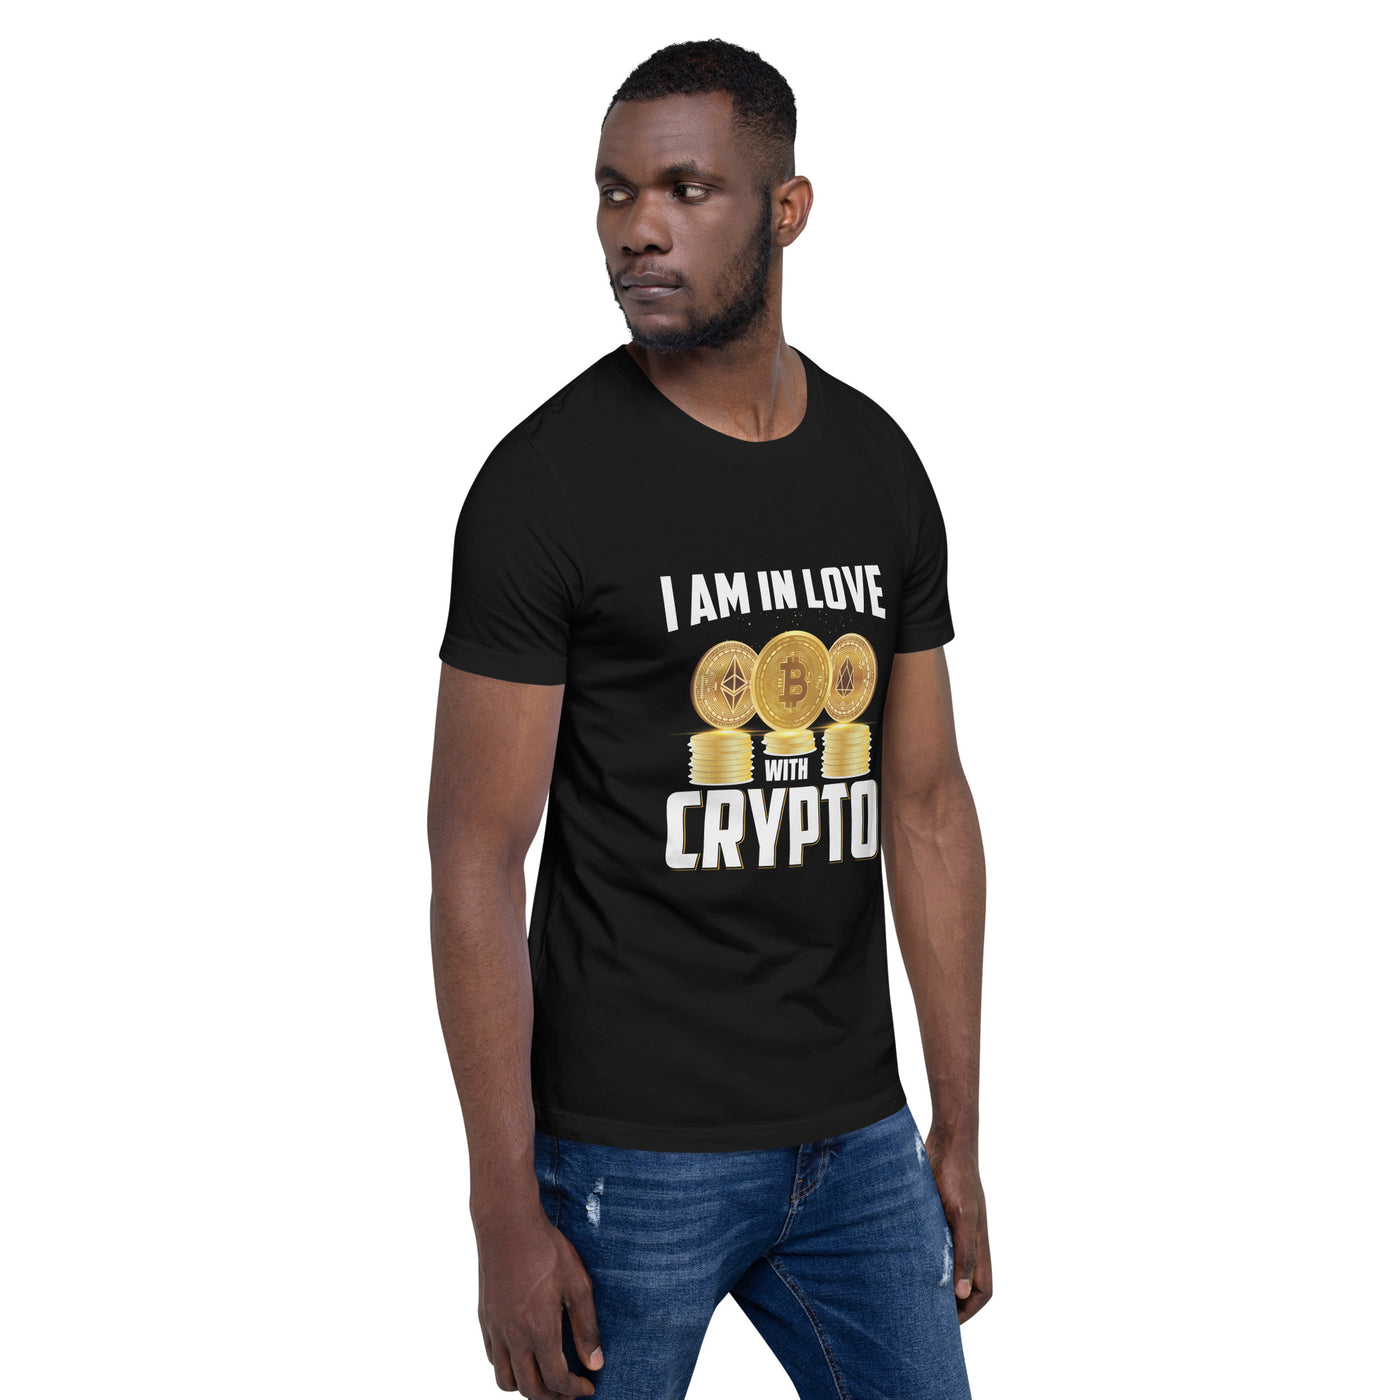 I am in love with Crypto Unisex t-shirt